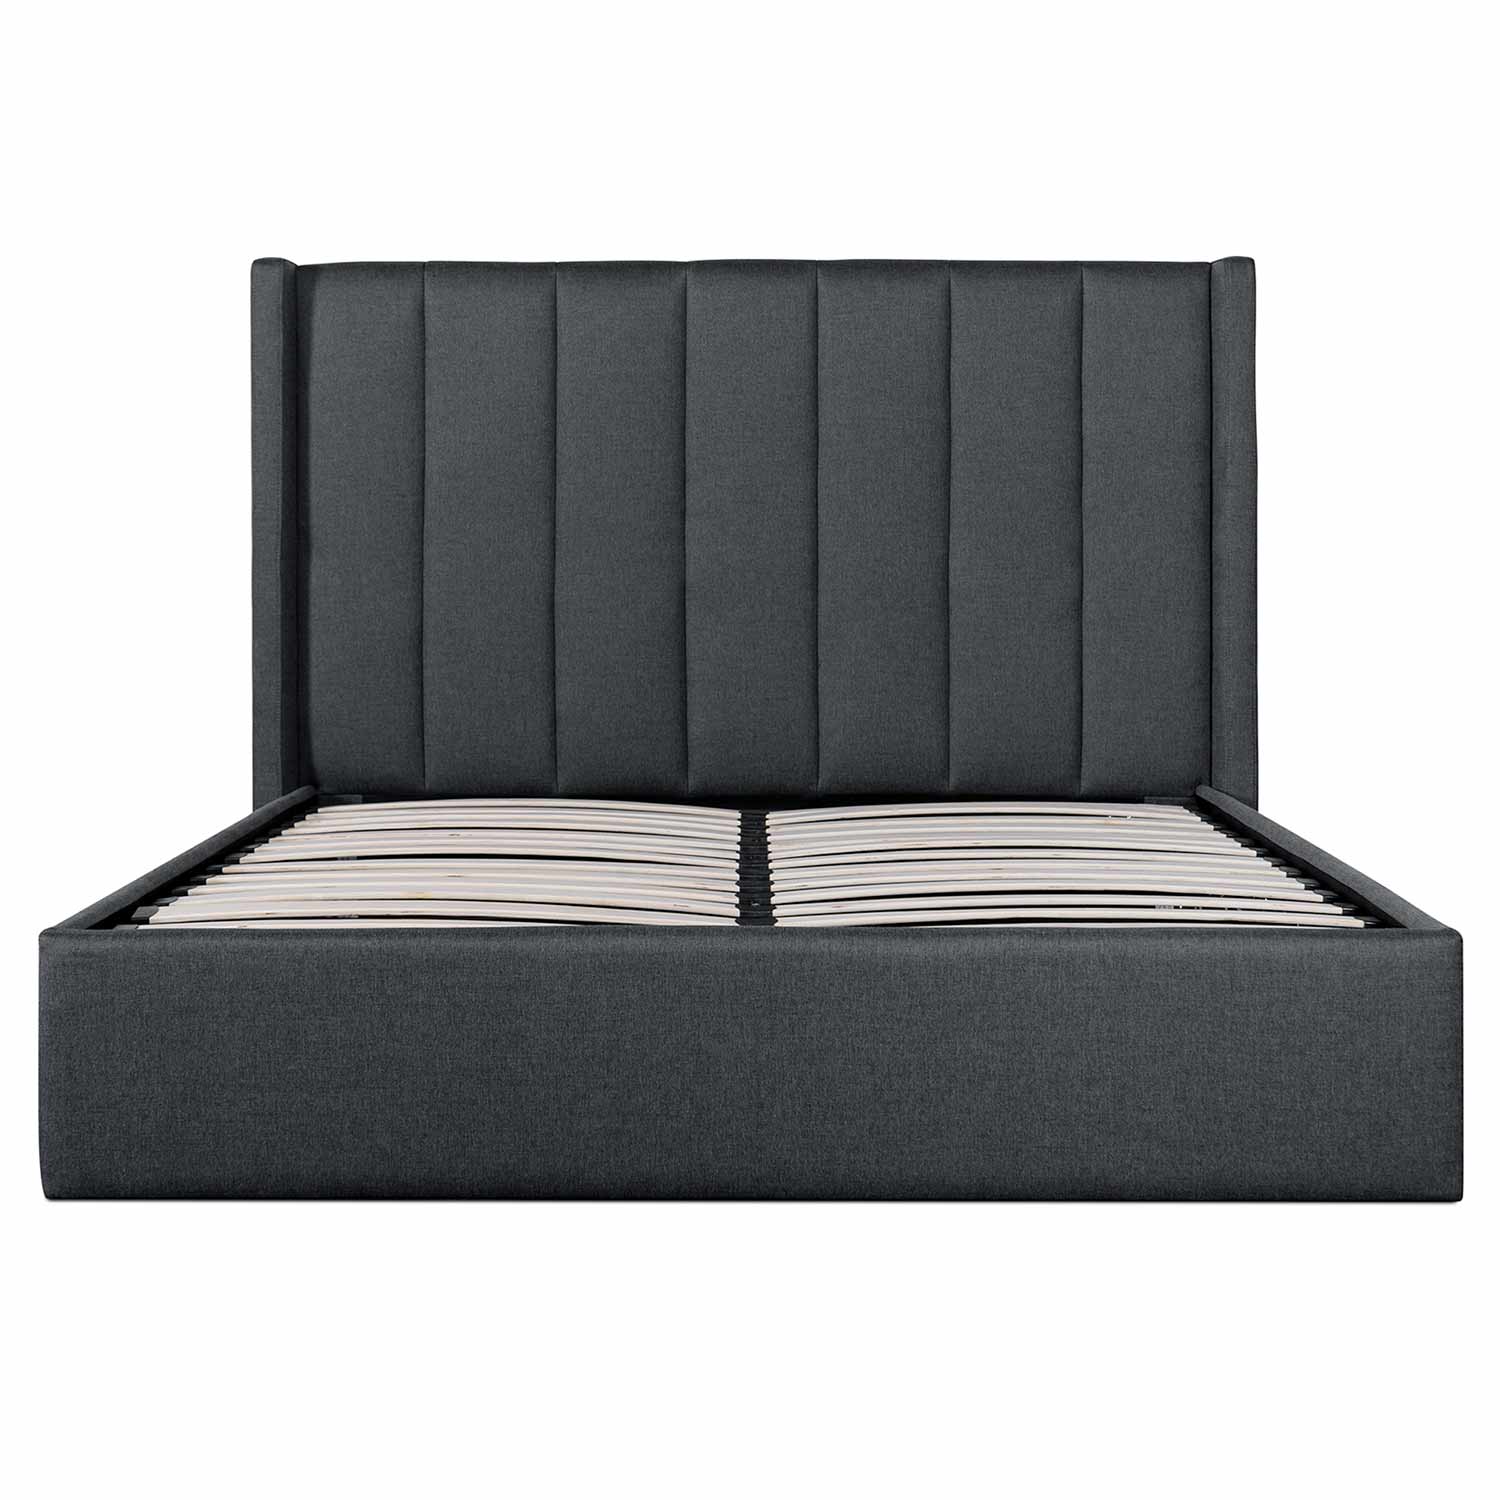 Vivienne Fabric King Bed Frame - Charcoal Grey - Beds